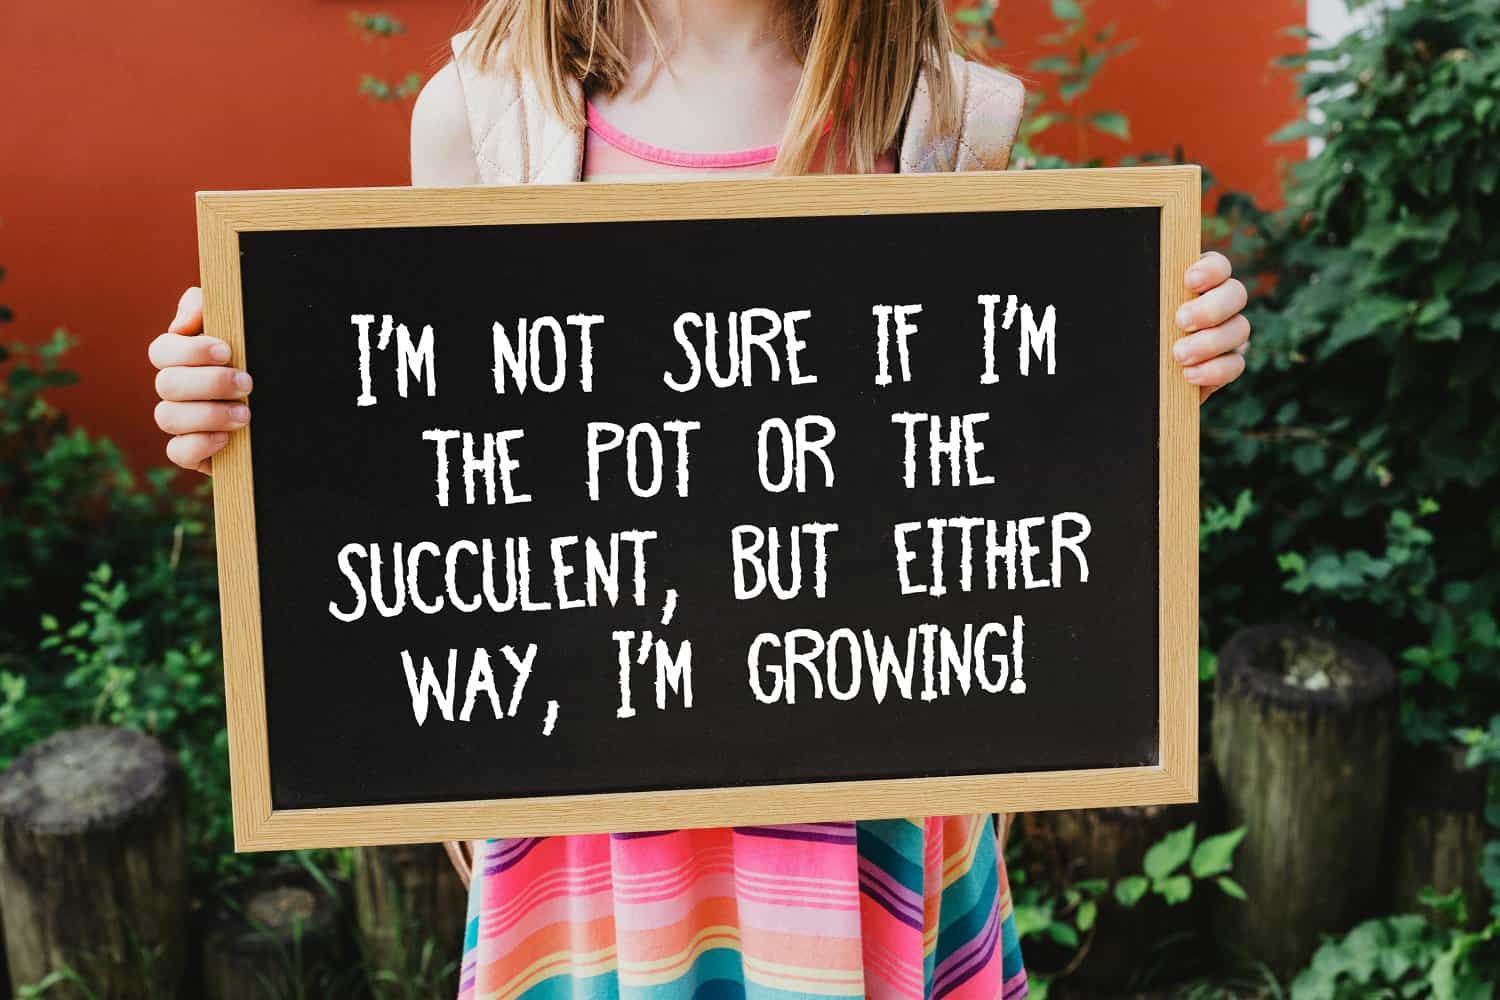 girl holding chalkboard with succulent pun in front of plants